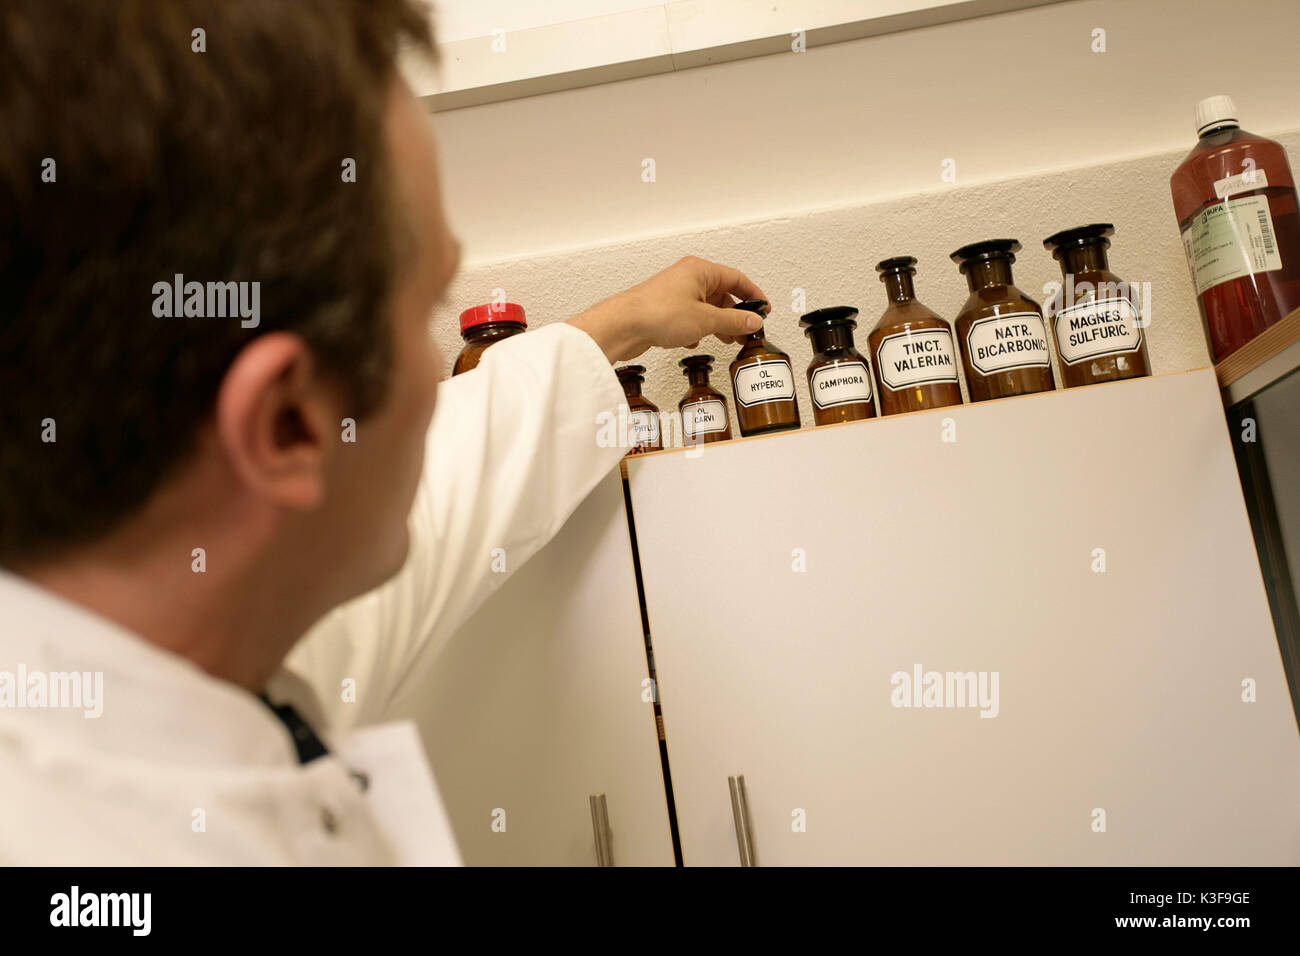 Chemist reaches for bottle on a cupboard Stock Photo